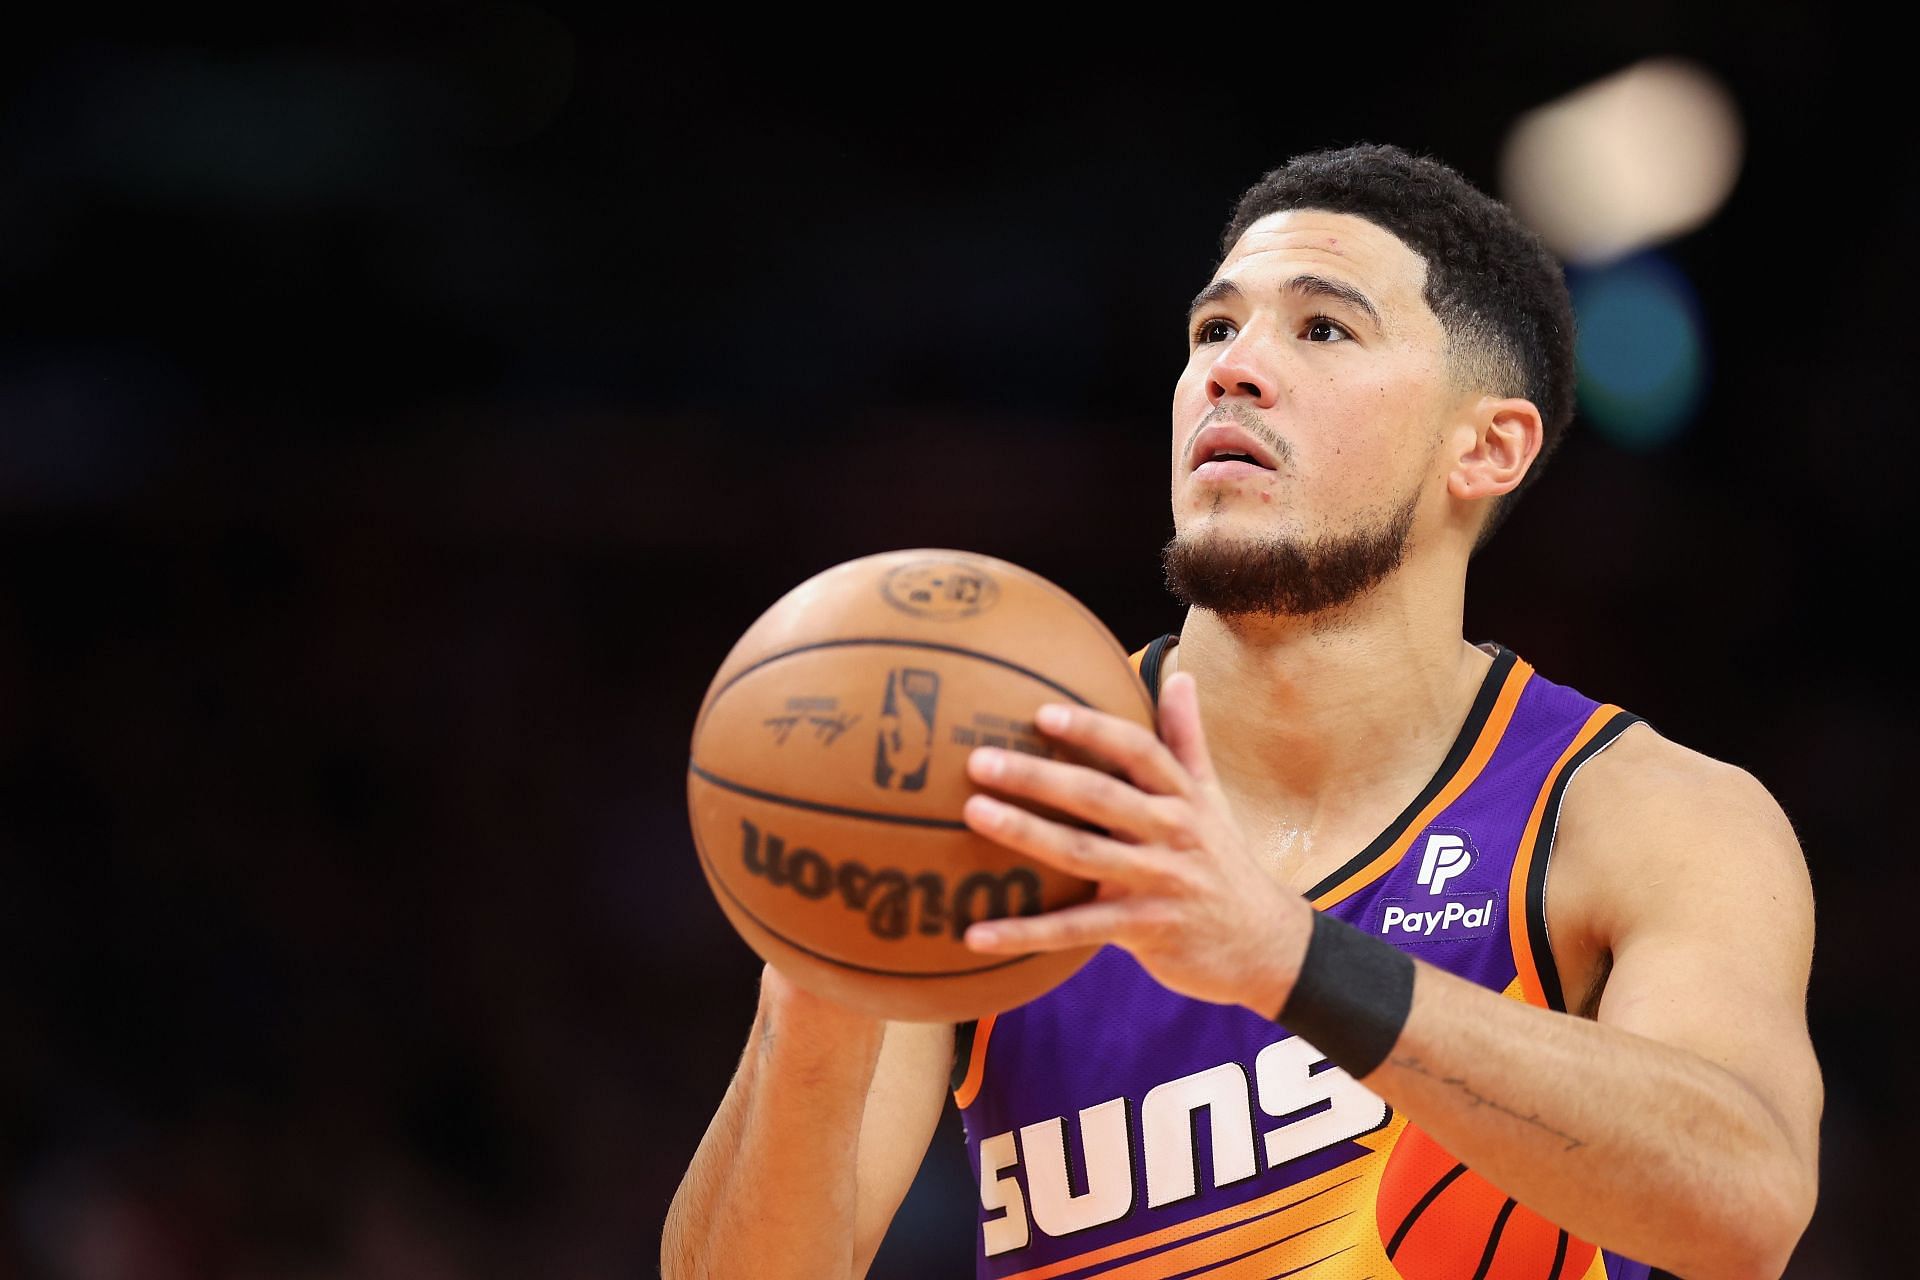 Phoenix Suns All-Star shooting guard Devin Booker in action